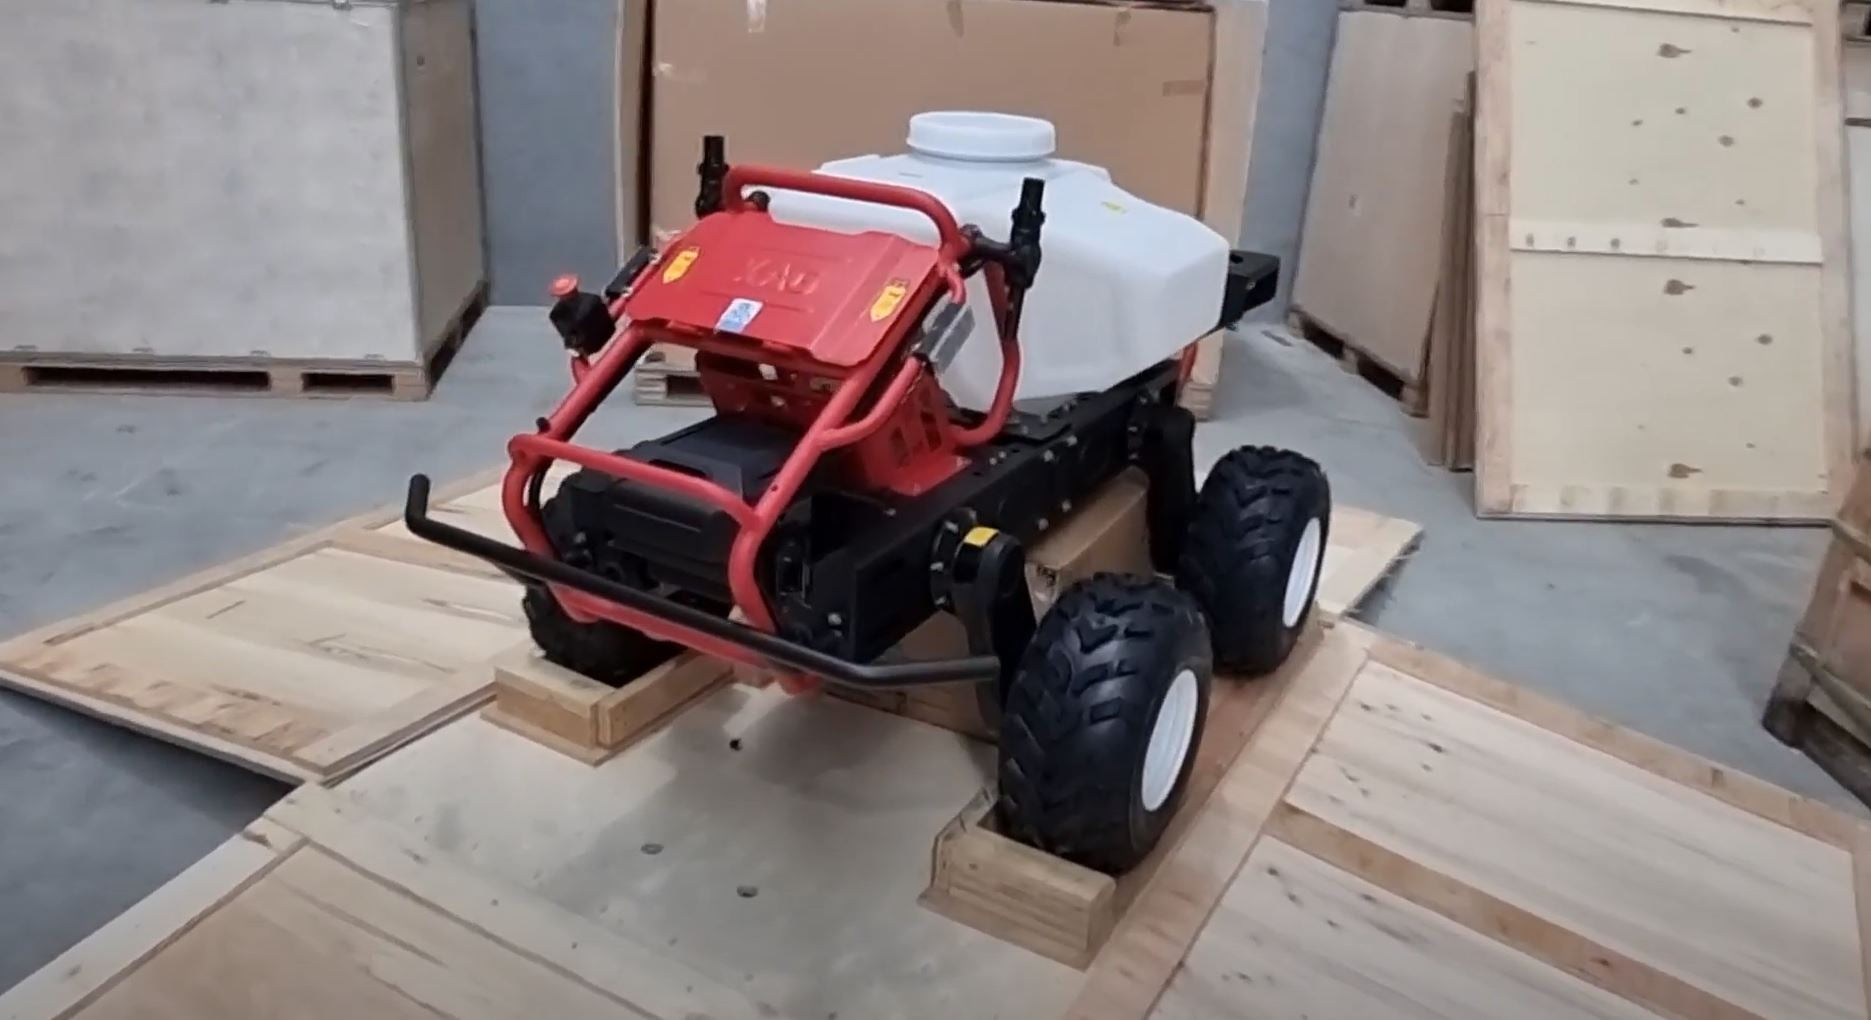 Exclusive Unboxing of the XAG R150 Unmanned Ground Vehicle